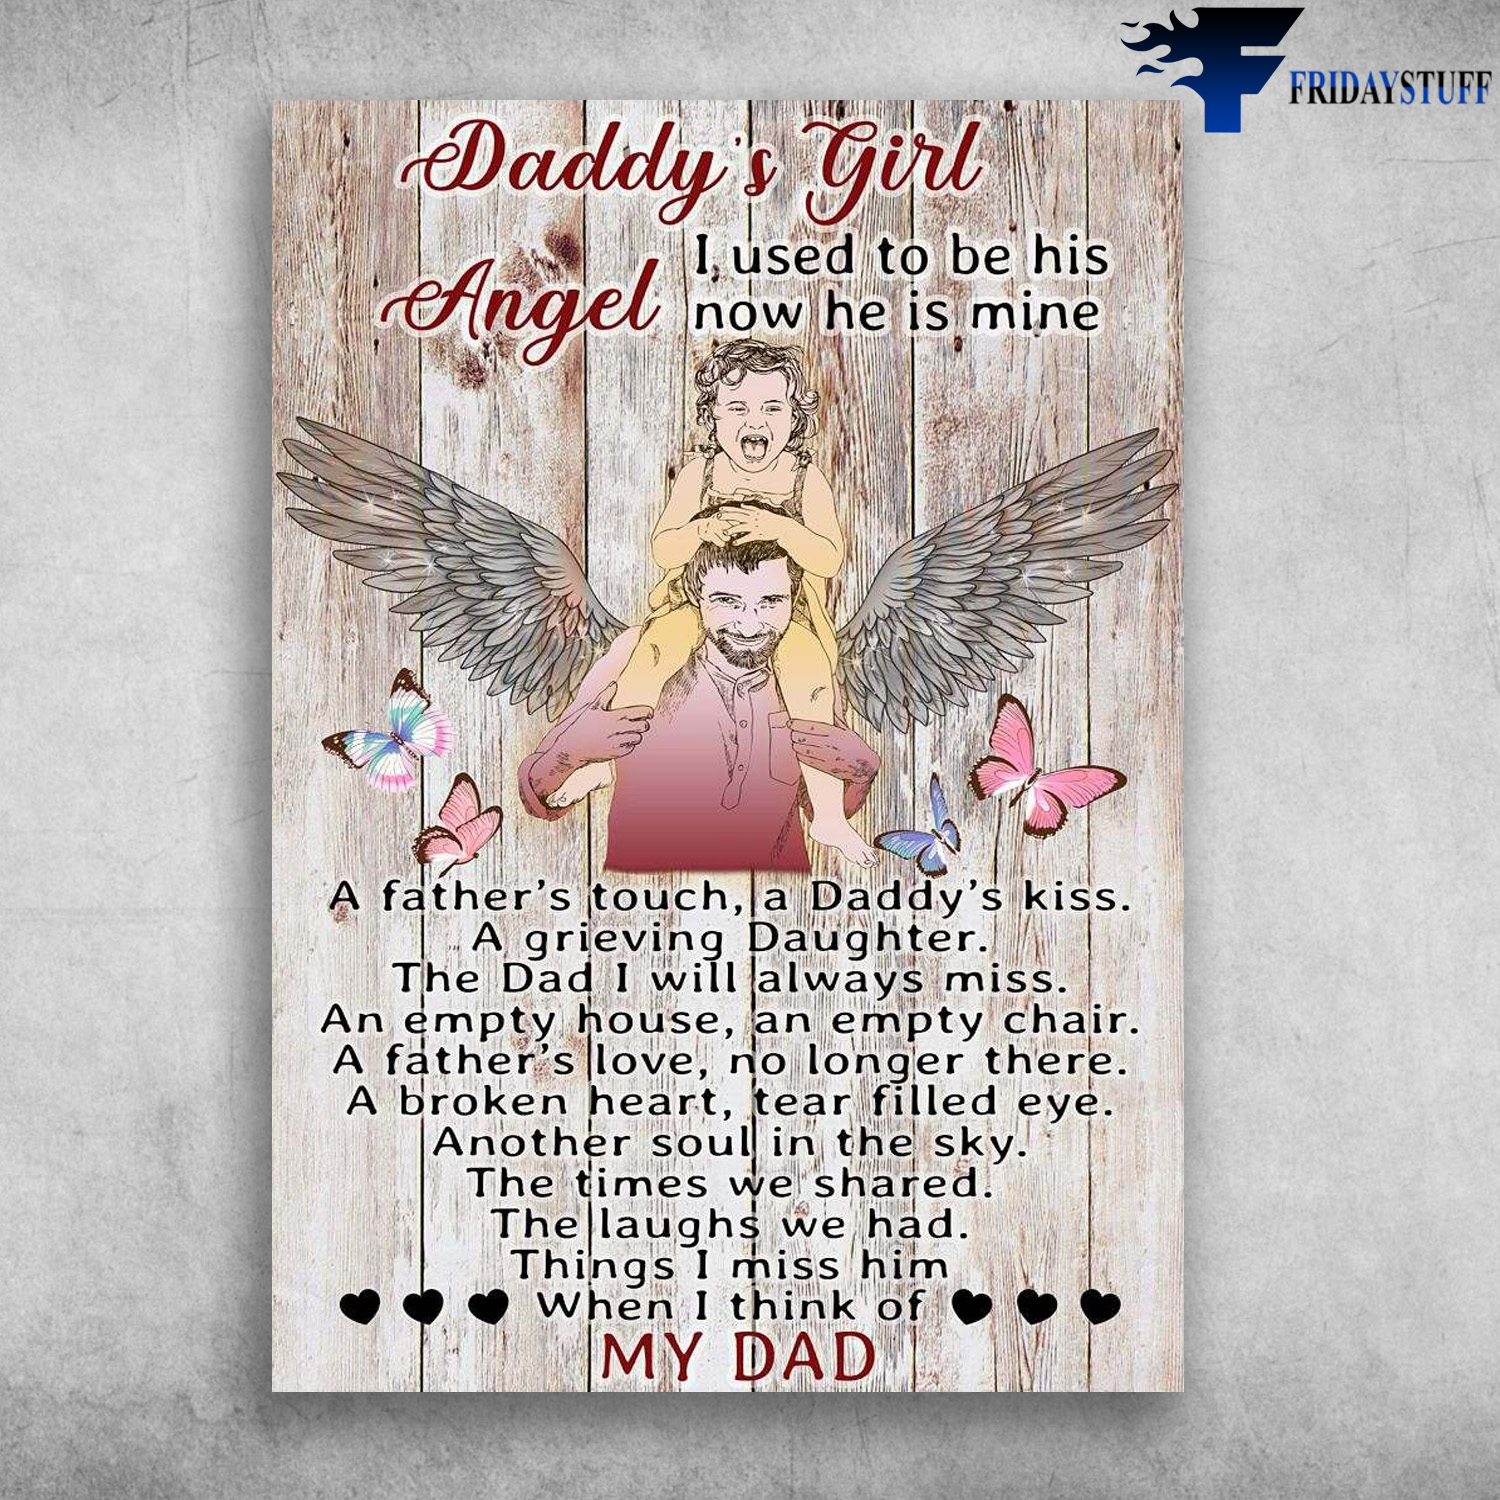 Dad And Daughter, Angel Dad - Daddy's Girl, I Used To Be His Angel, Now He Is Mine, A Father's Touch, A Daddy's Kiss, A Grieving Daughter, The Dad I Will Always Miss